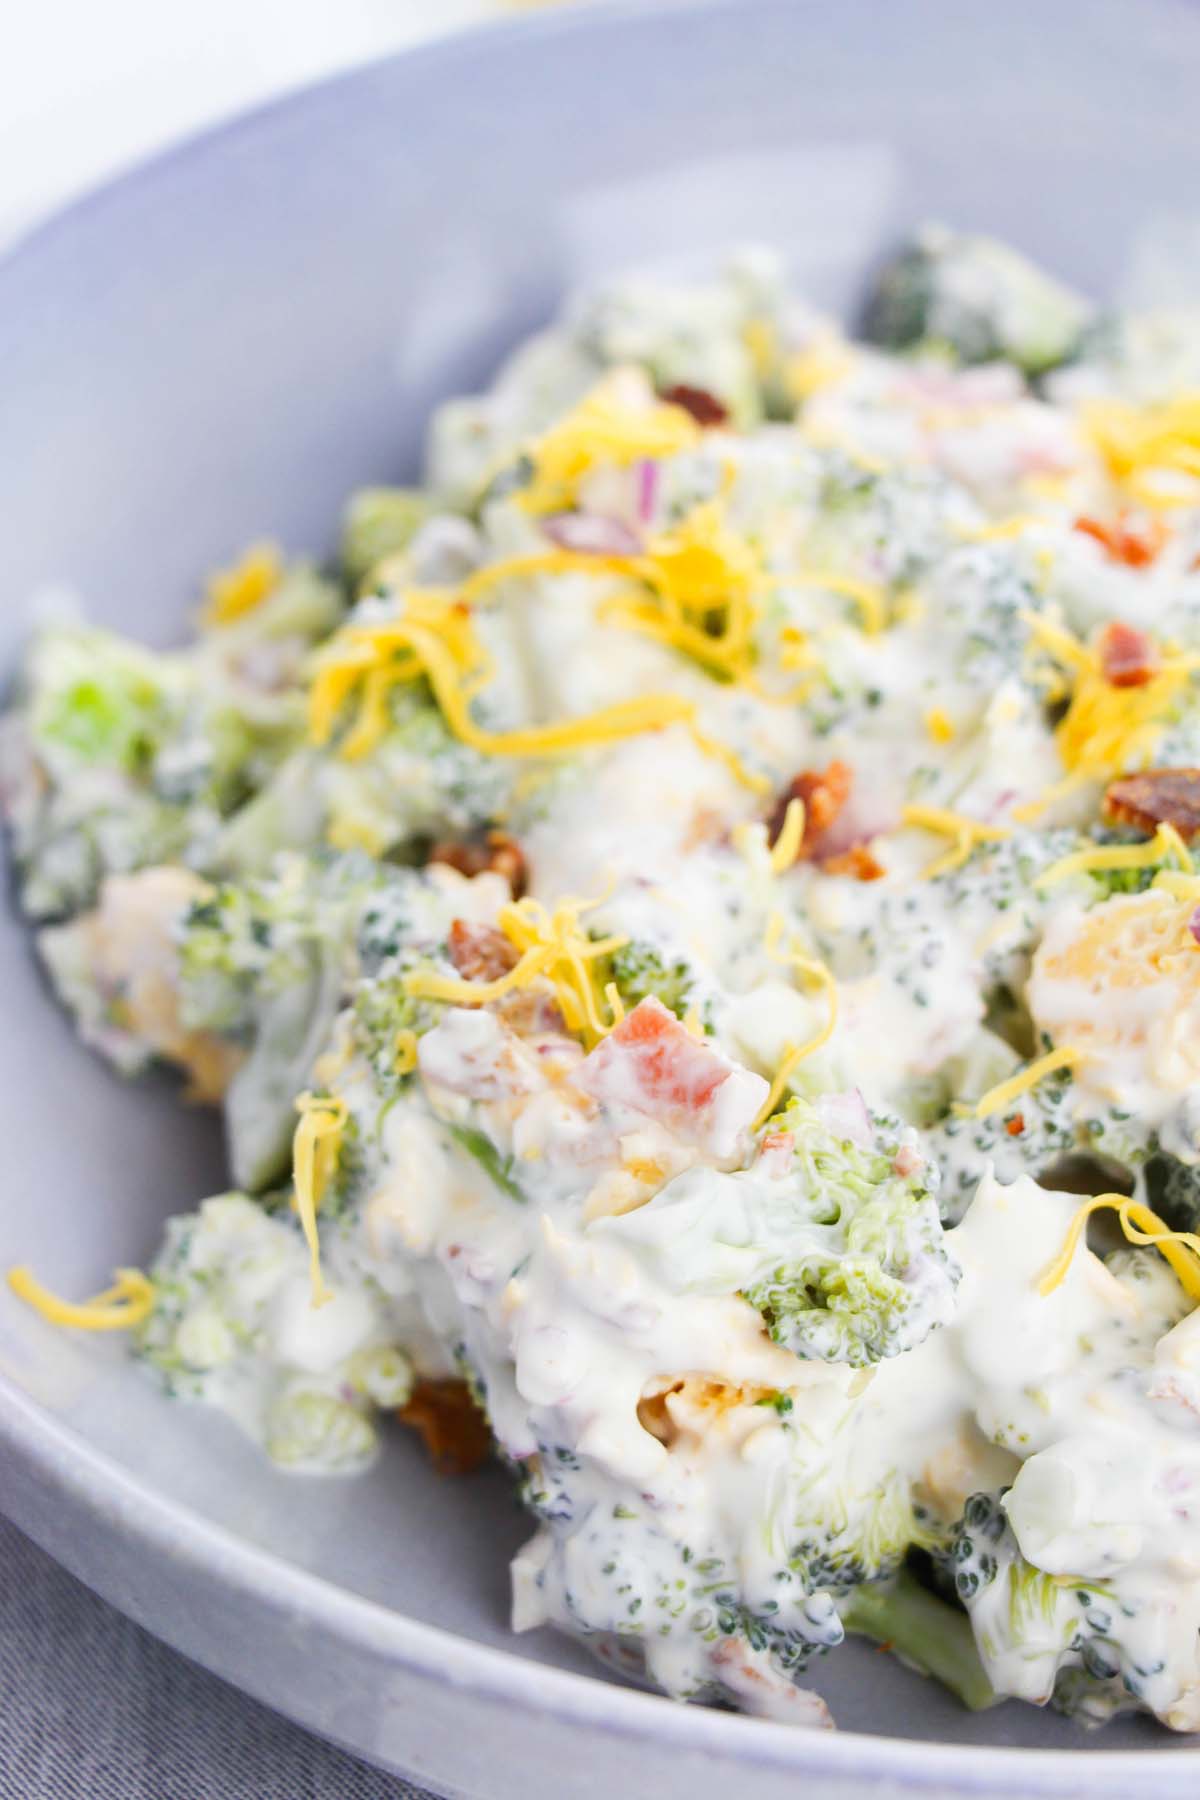 Broccoli salad topped with shredded cheese.